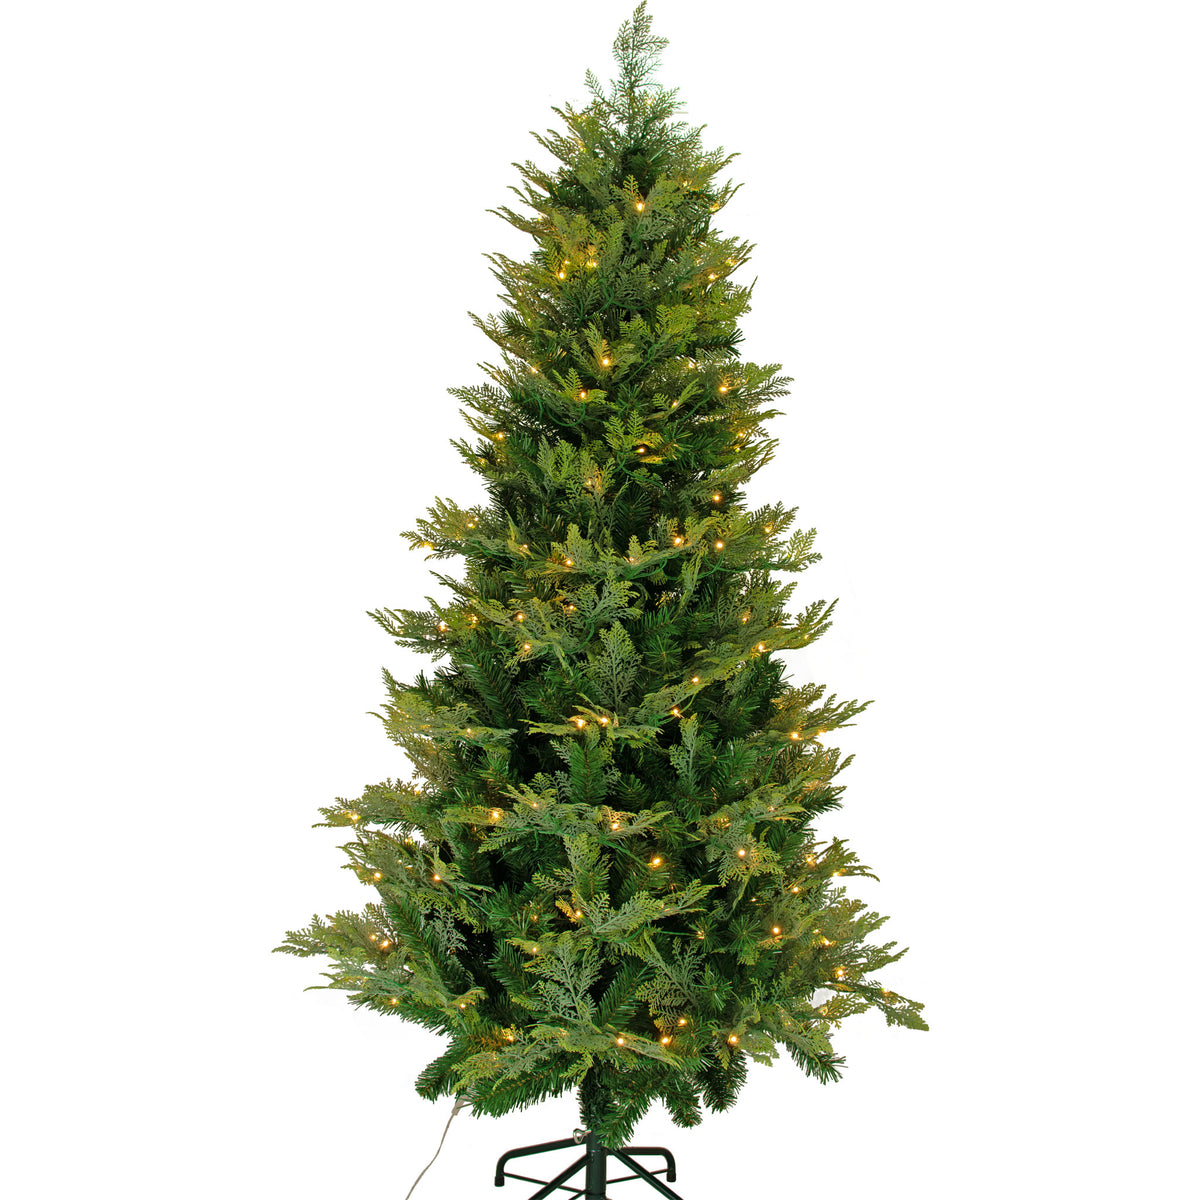 Pre-Lit with LED Lights - The 6-foot tall Leyland Cypress Tree from the Luxe Christmas Collection comes pre-lit with beautiful, energy-efficient LED lights.